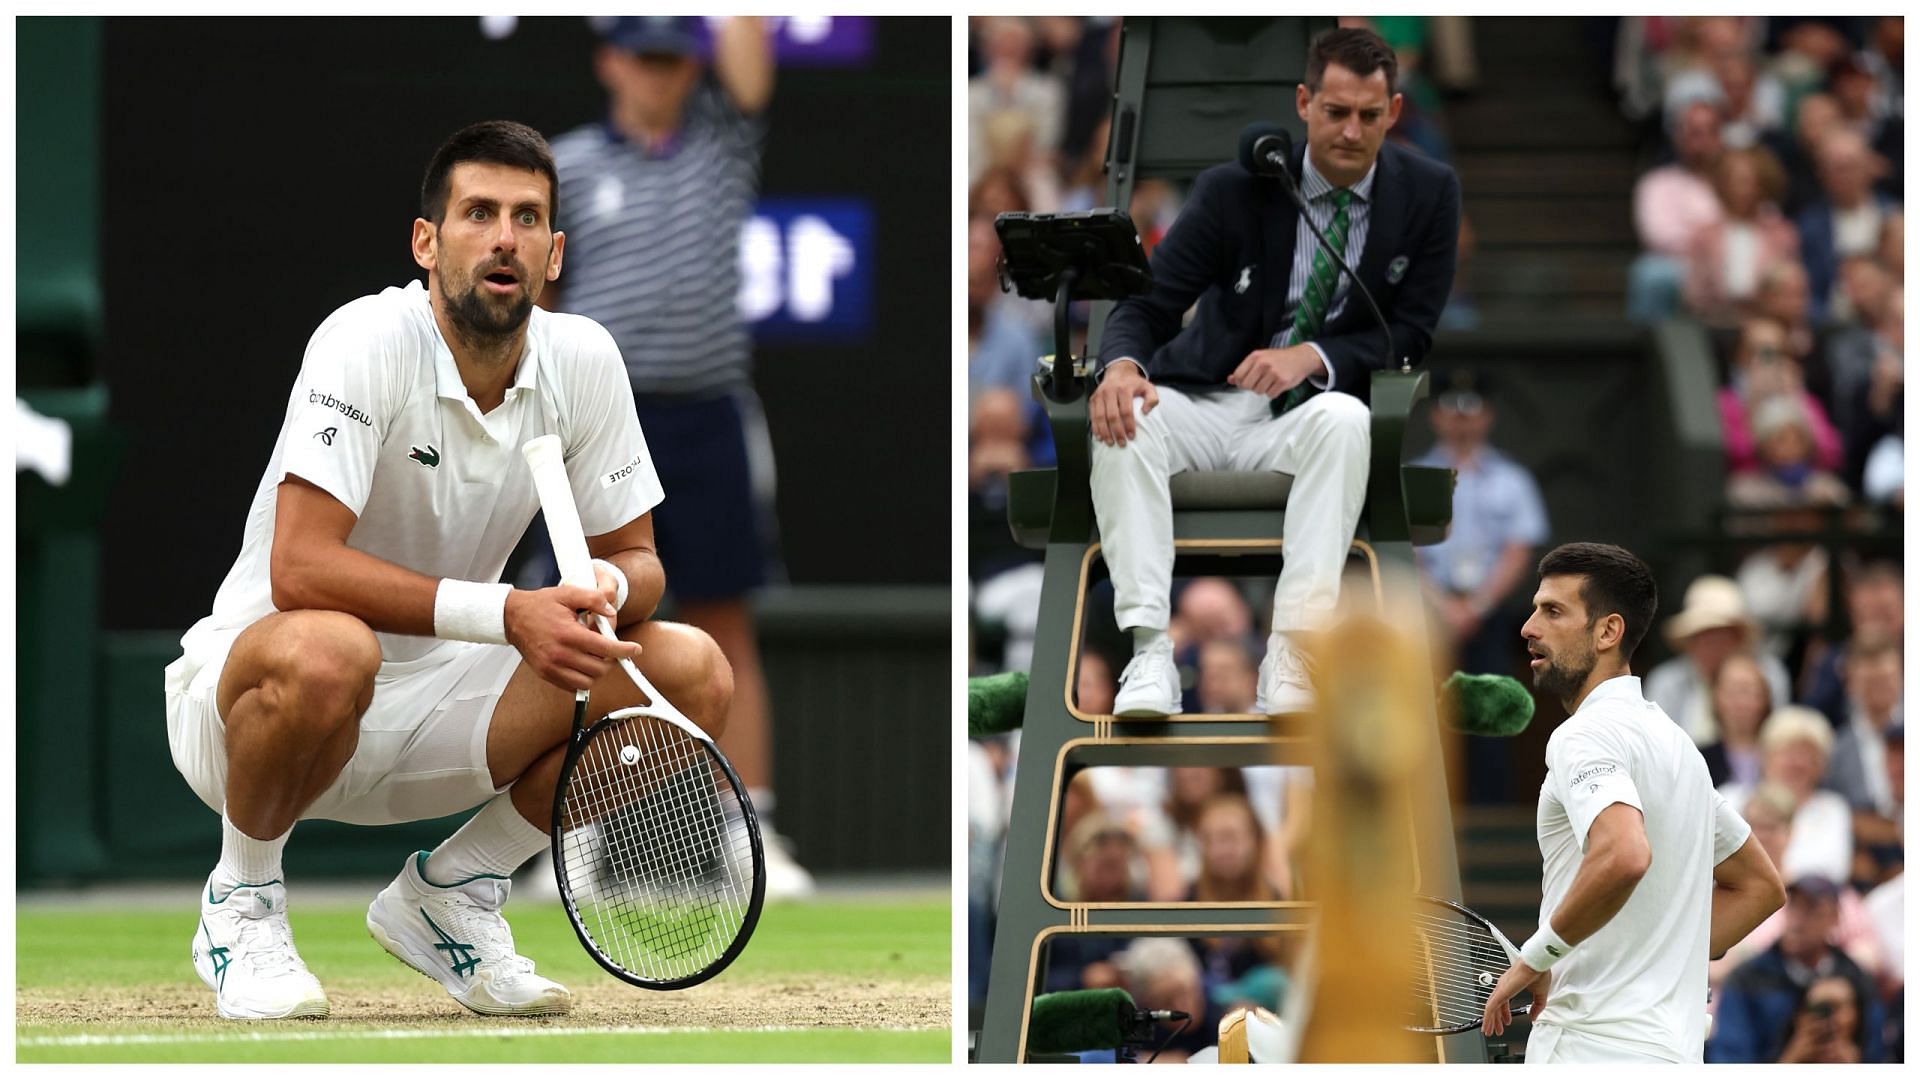 Novak Djokovic revealed that the chair umpire hindrance call almost affected the outcome of his Wimbledon semifinal against Jannik Sinner.